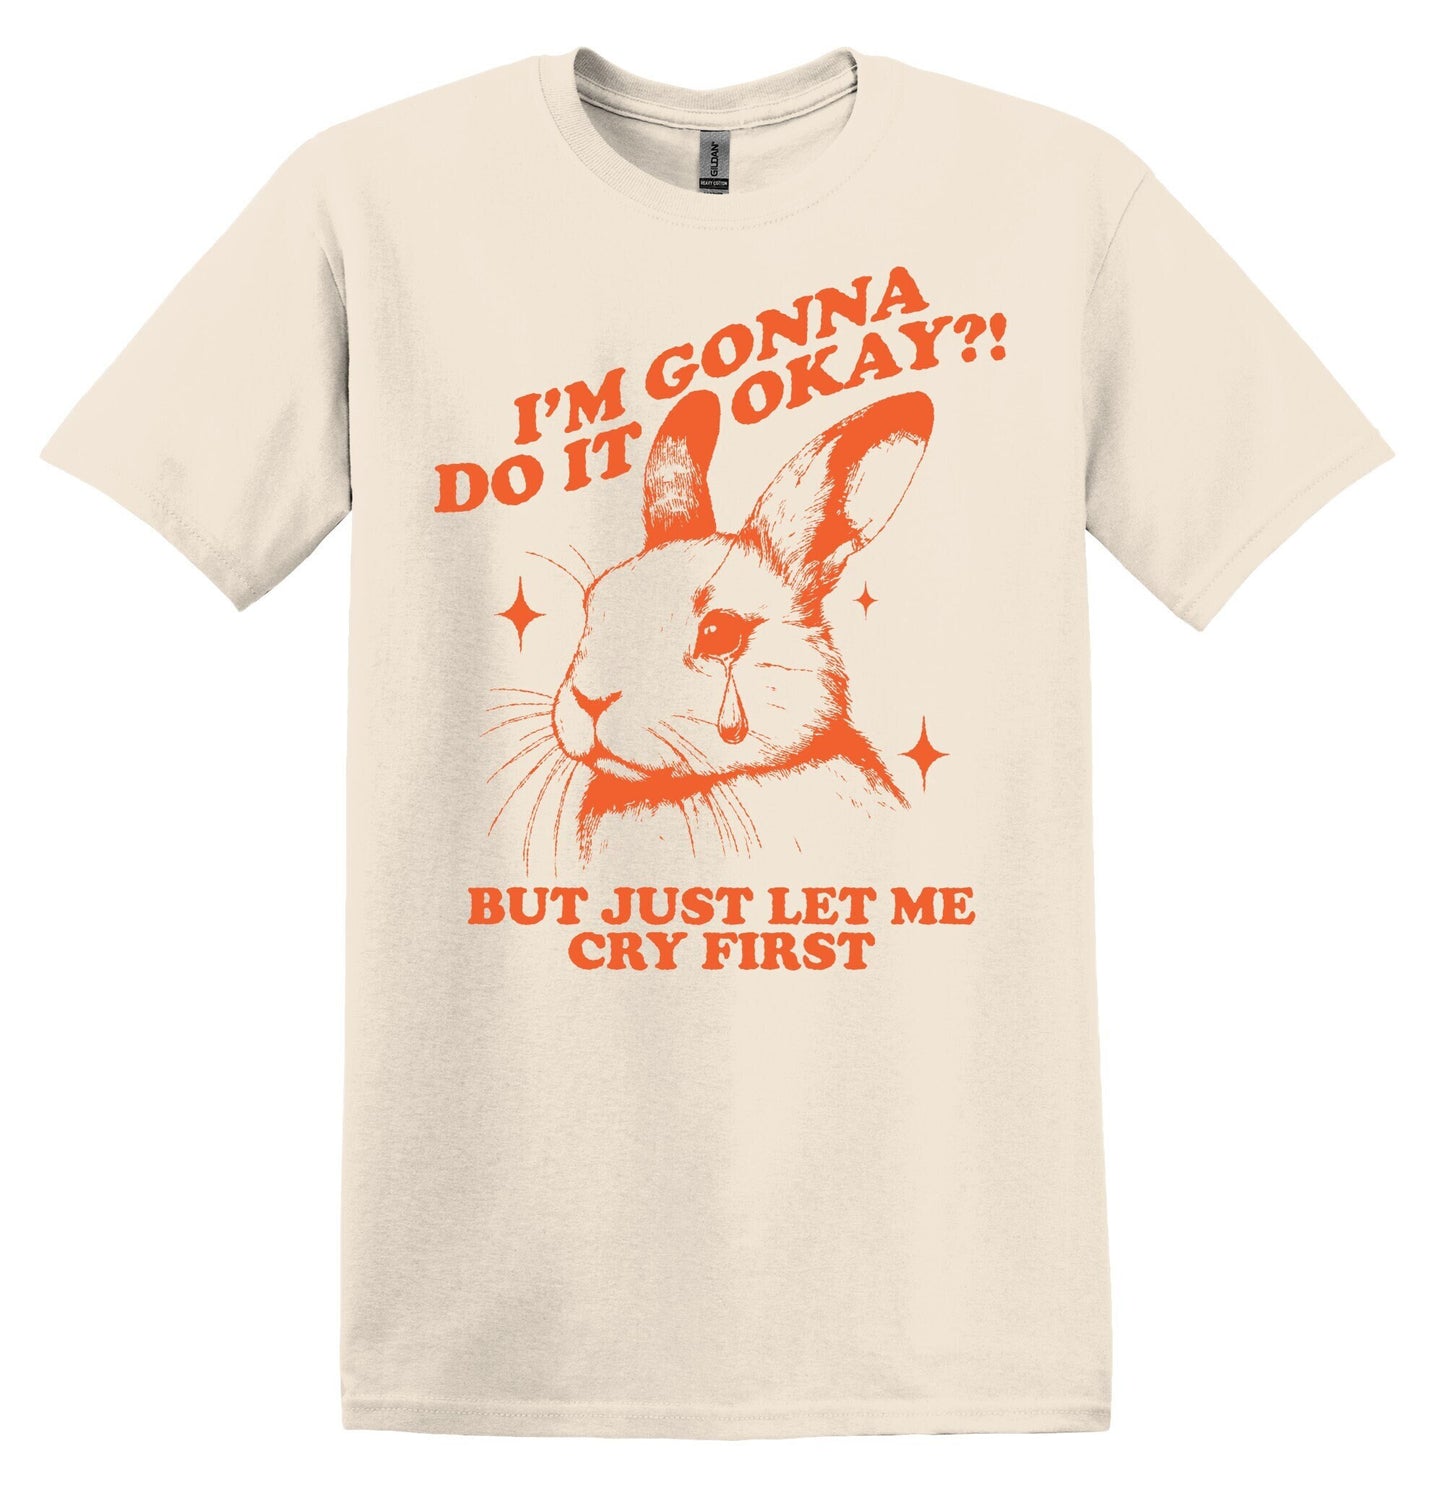 I'm Gonna do it Okay? But Just Let Me Cry First TShirt Graphic Shirt Retro Adult Shirt Vintage T-Shirt Nostalgia T-Shirt Relaxed Cotton Tee